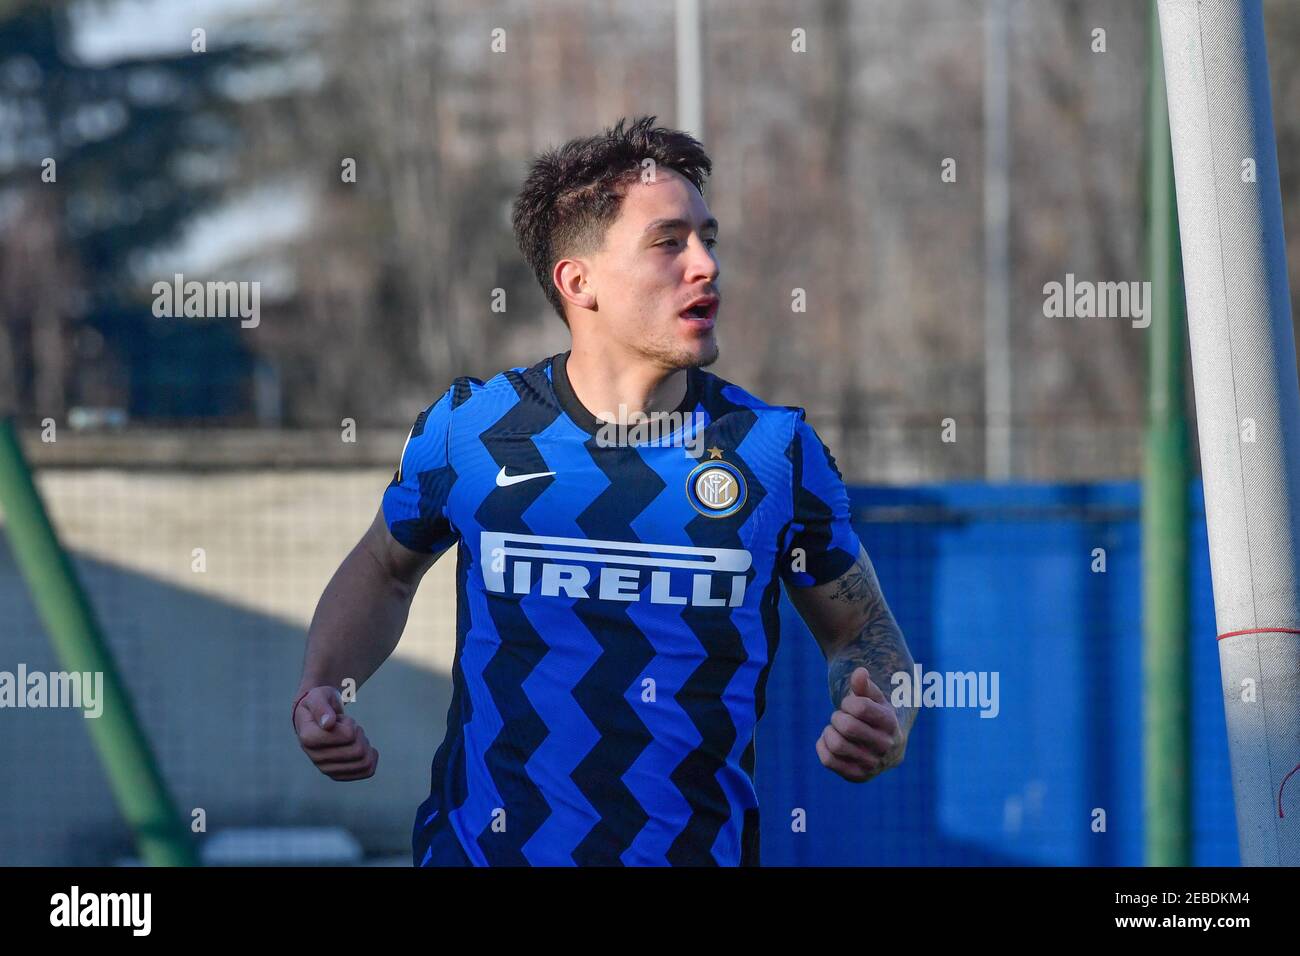 Milan, Italy. 11th, February 2021. Martín Satriano (11) of Inter U-19 seen during the Campionato Primavera 1 match between Inter and Roma at the Suning Youth Development Centre, Milan. (Photo credit: Gonzales Photo – Tommaso Fimiano). Stock Photo